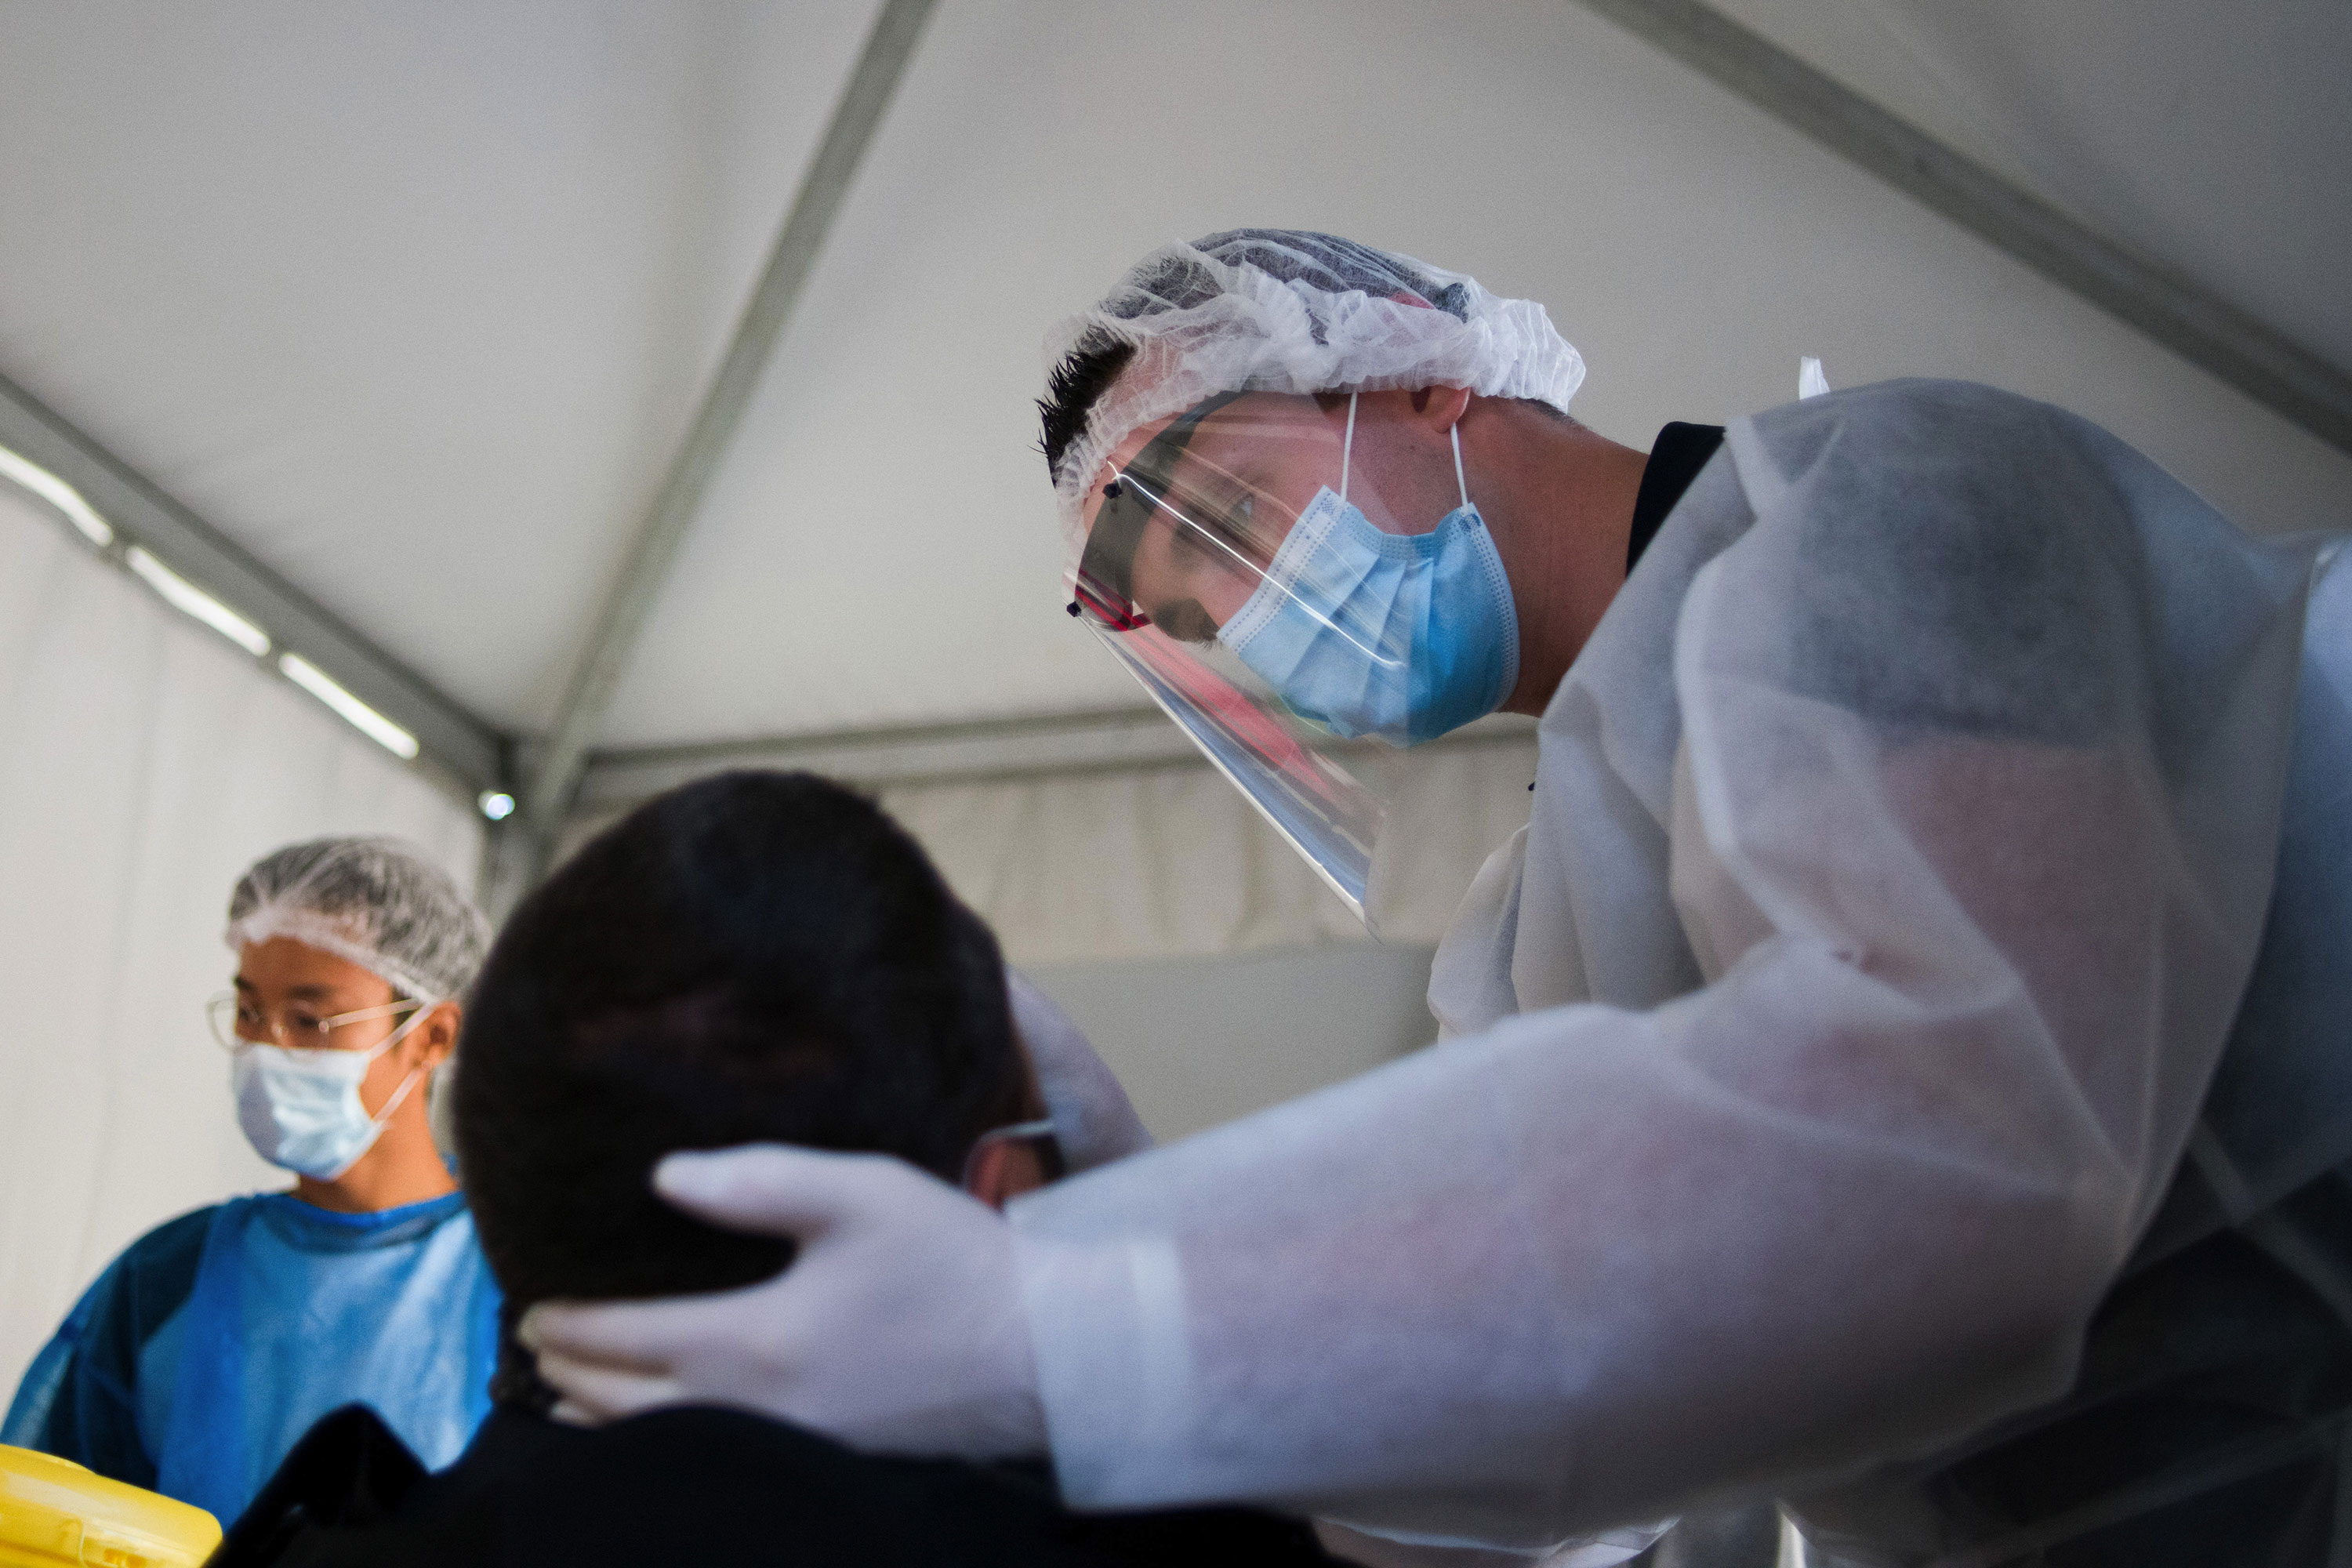 A medic administers a Covid-19 swab test on a patient in Paris on September 21.